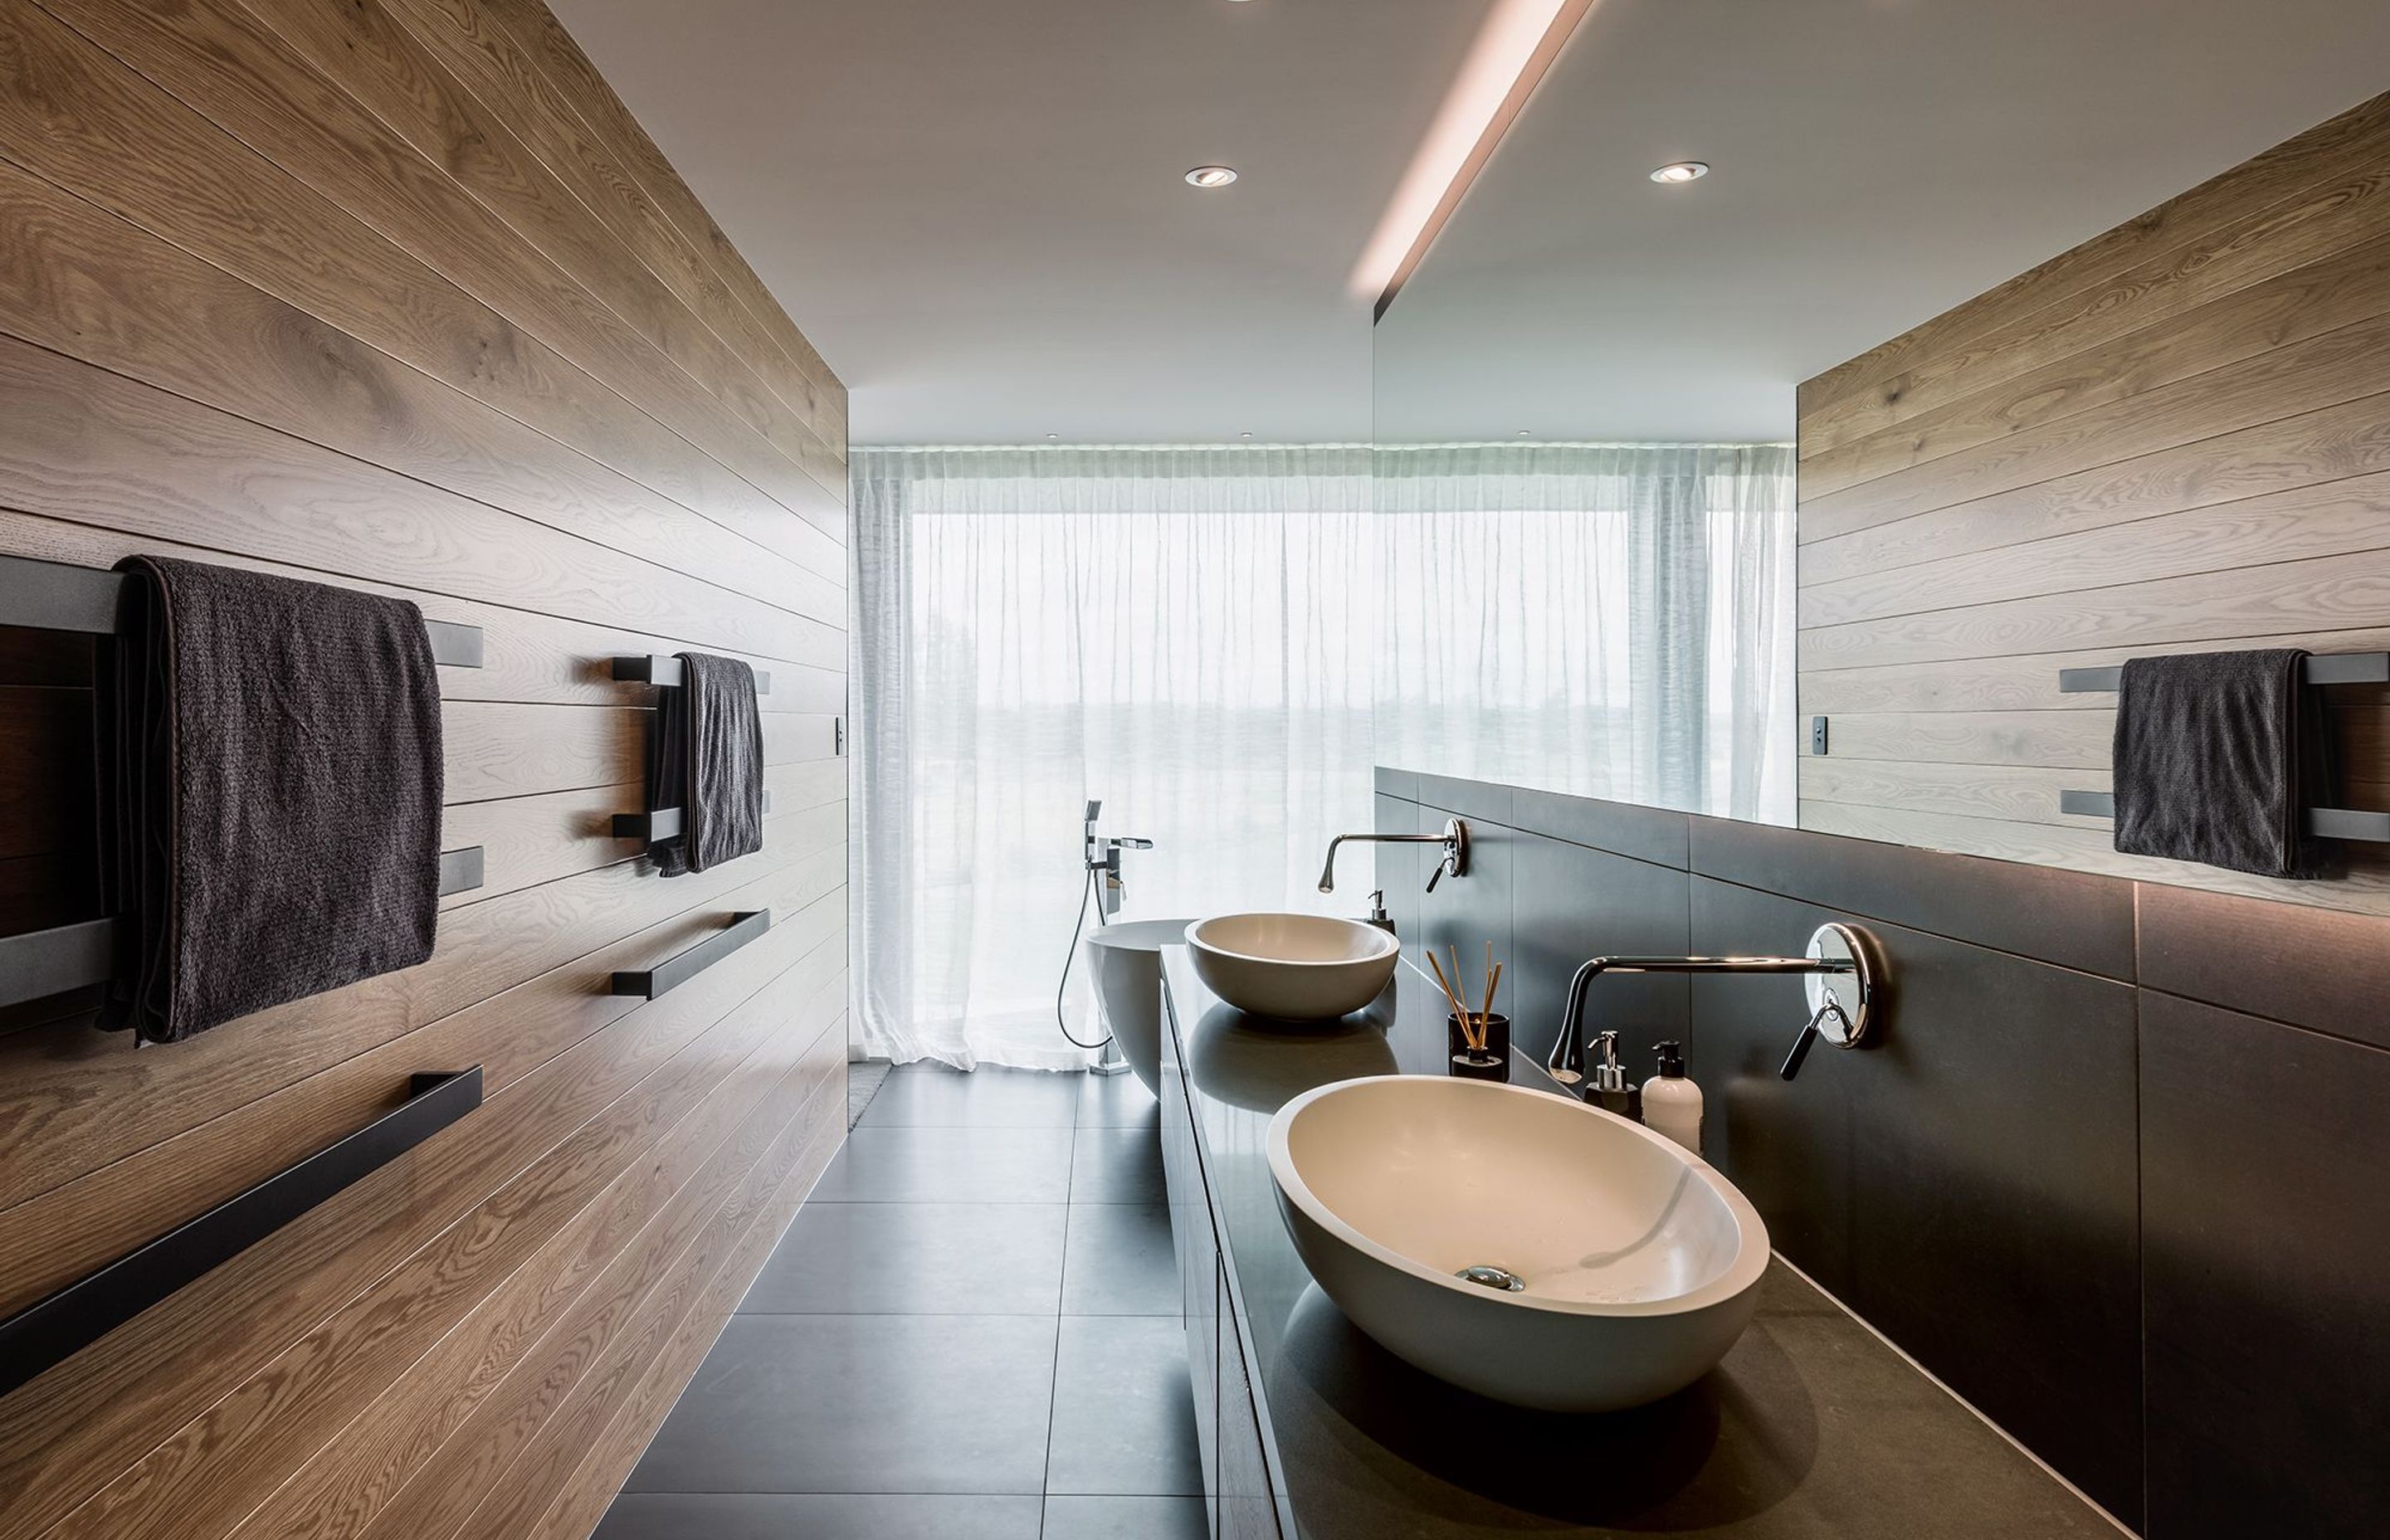 The en-suite bathroom is clad in horizontal timber paneling and large-format tiles